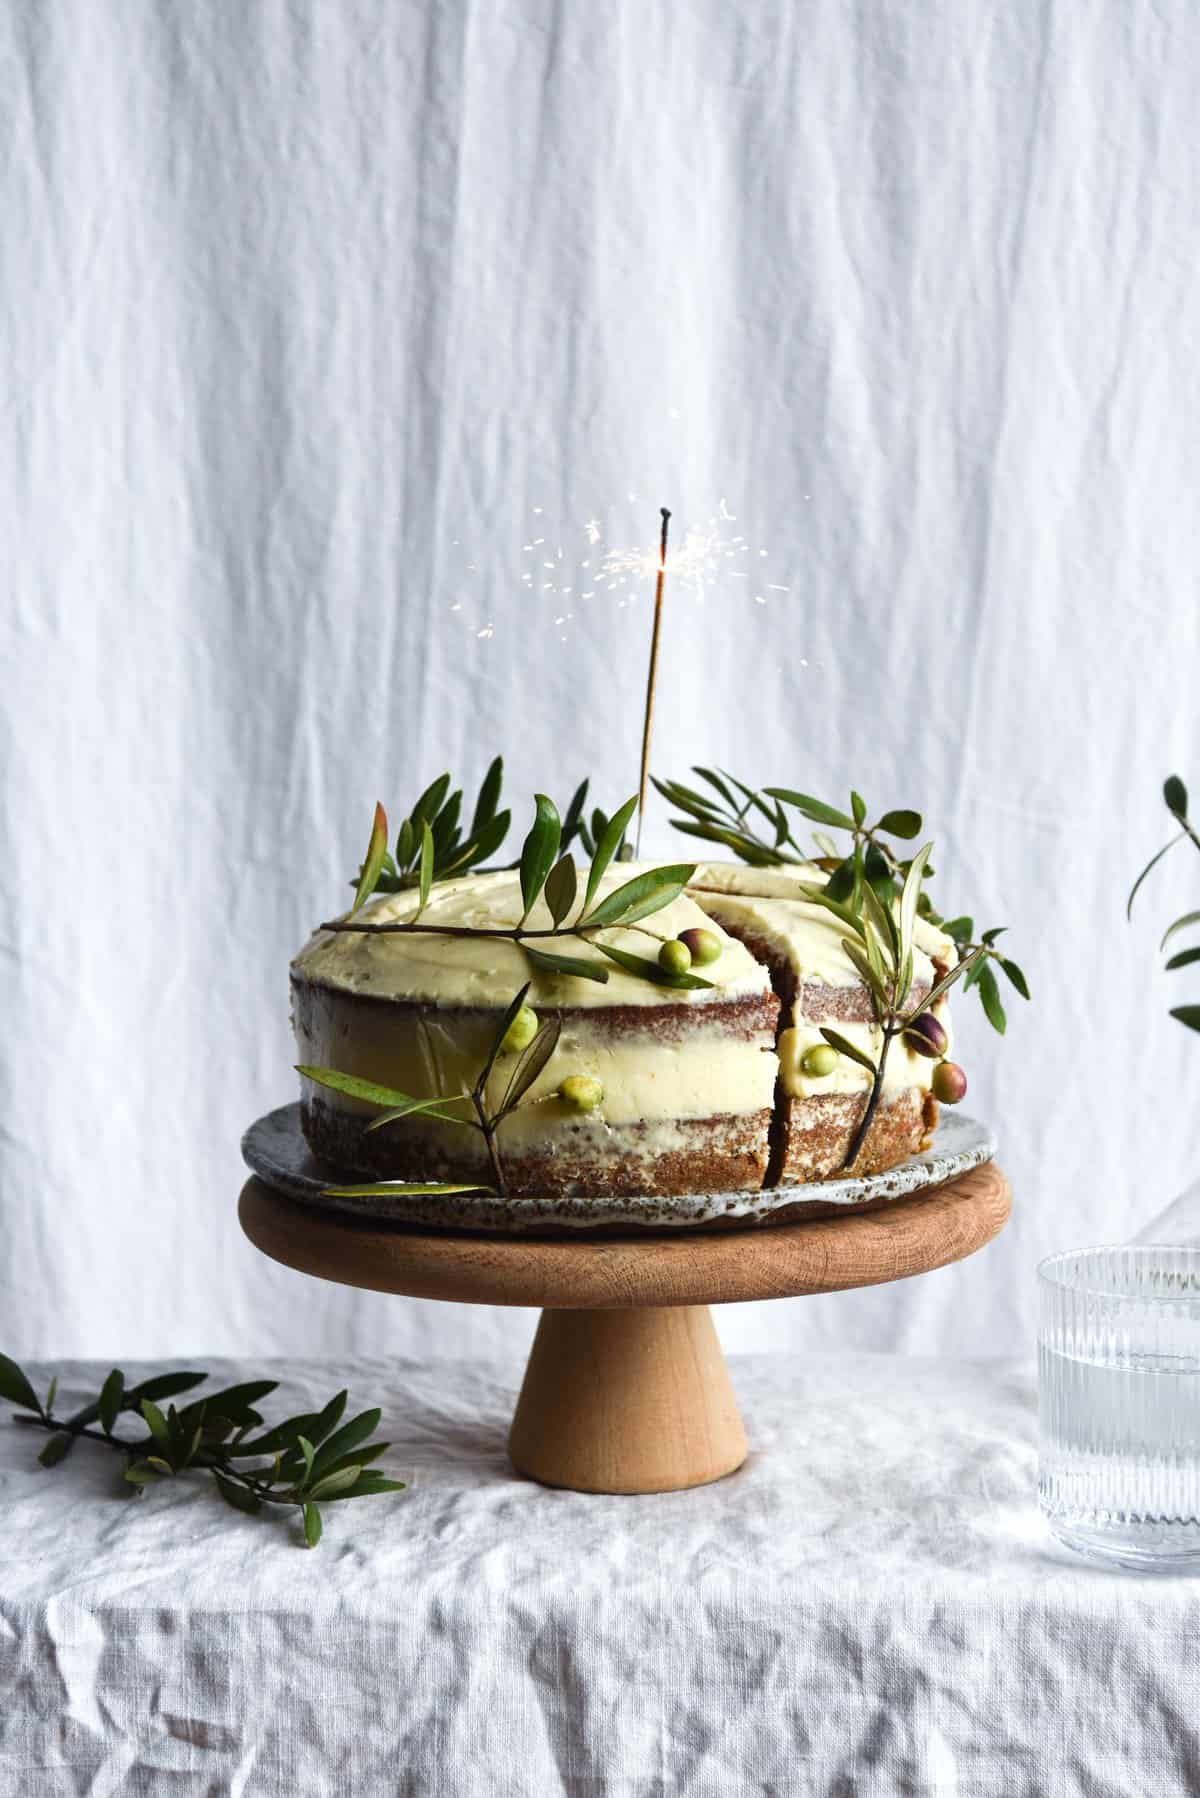 A side on view of a gluten free carrot cake. The cake is a layer cake, topped with naked cream cheese icing. The sides of the cake are decorated with olive branches, and a lit sparkler stands in the middle of the cake. The cake sits on a wooden cake stand on a white linen backdrop